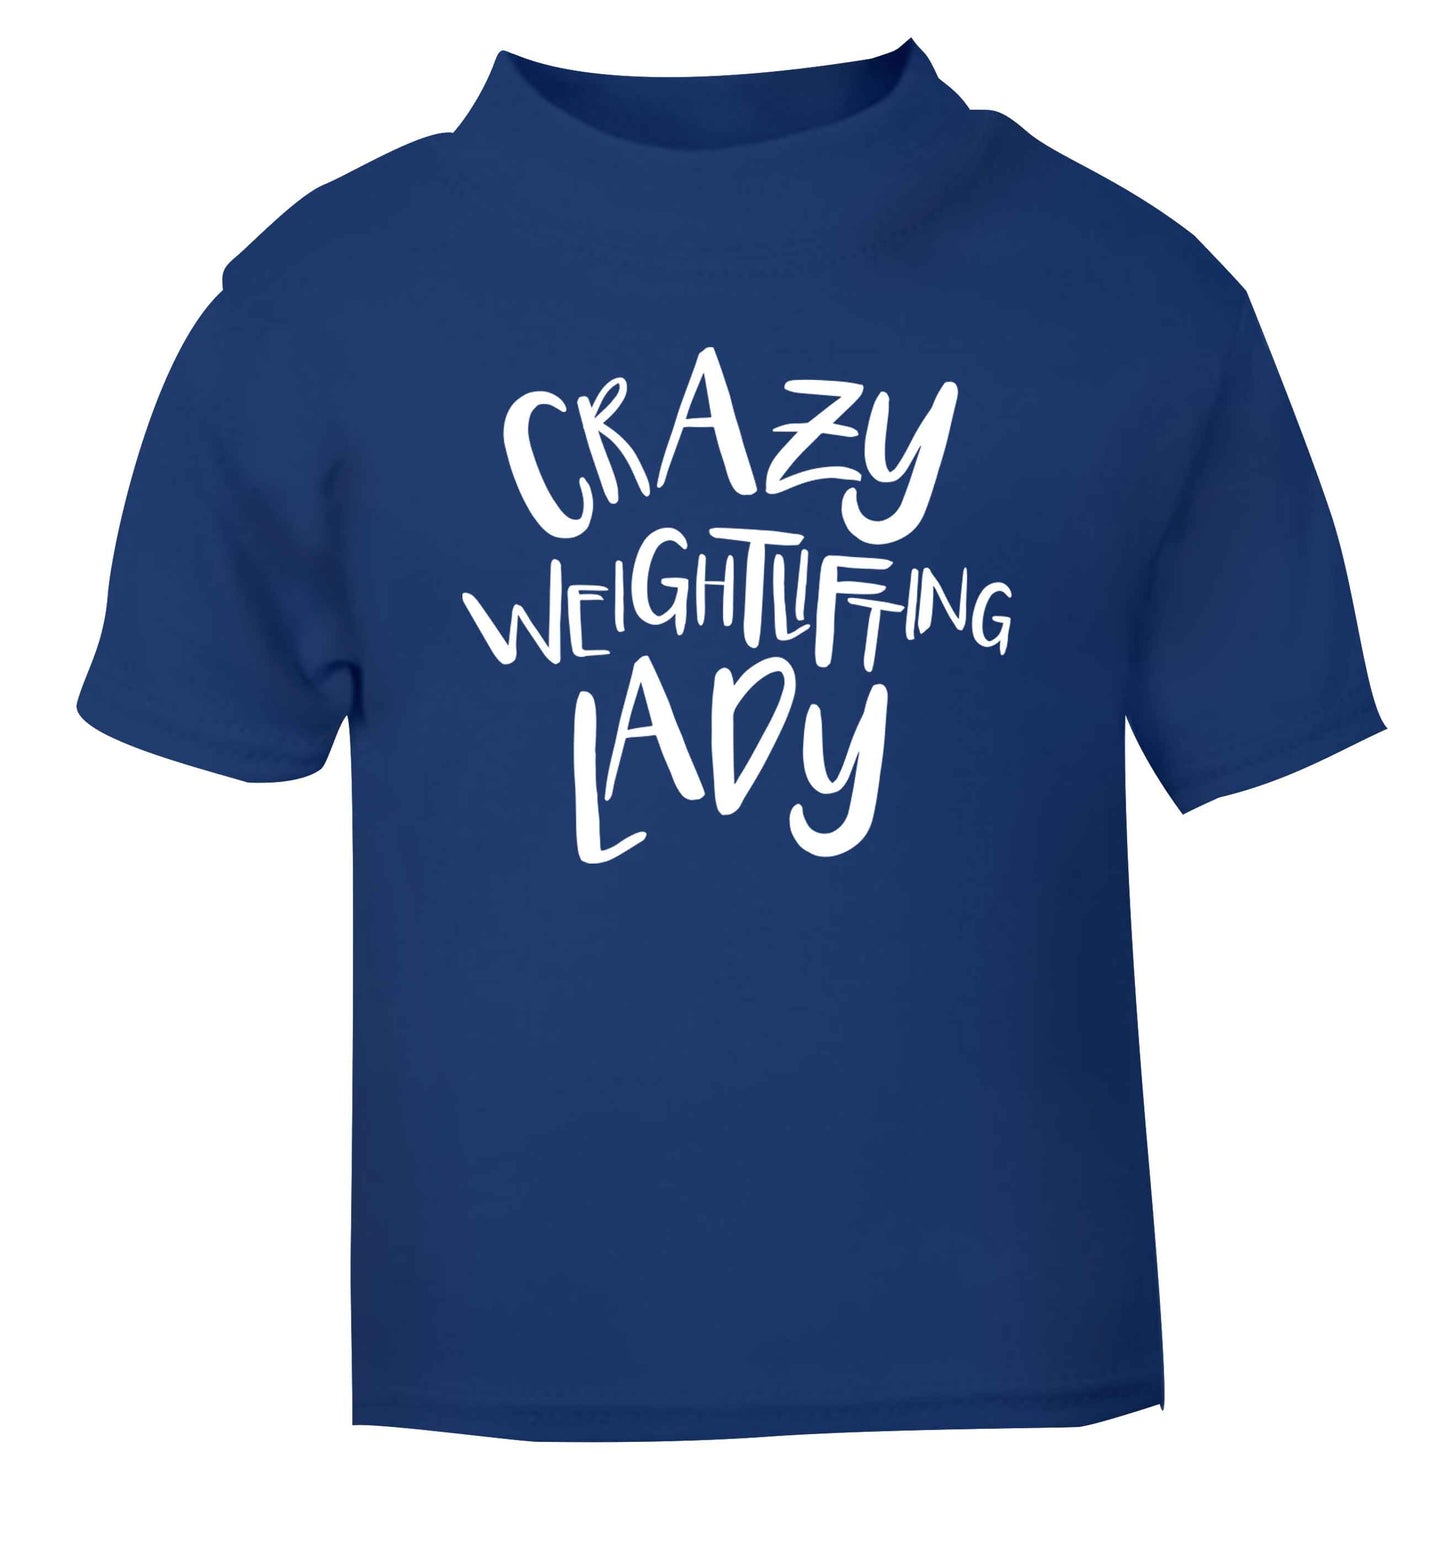 Crazy weightlifting lady blue Baby Toddler Tshirt 2 Years